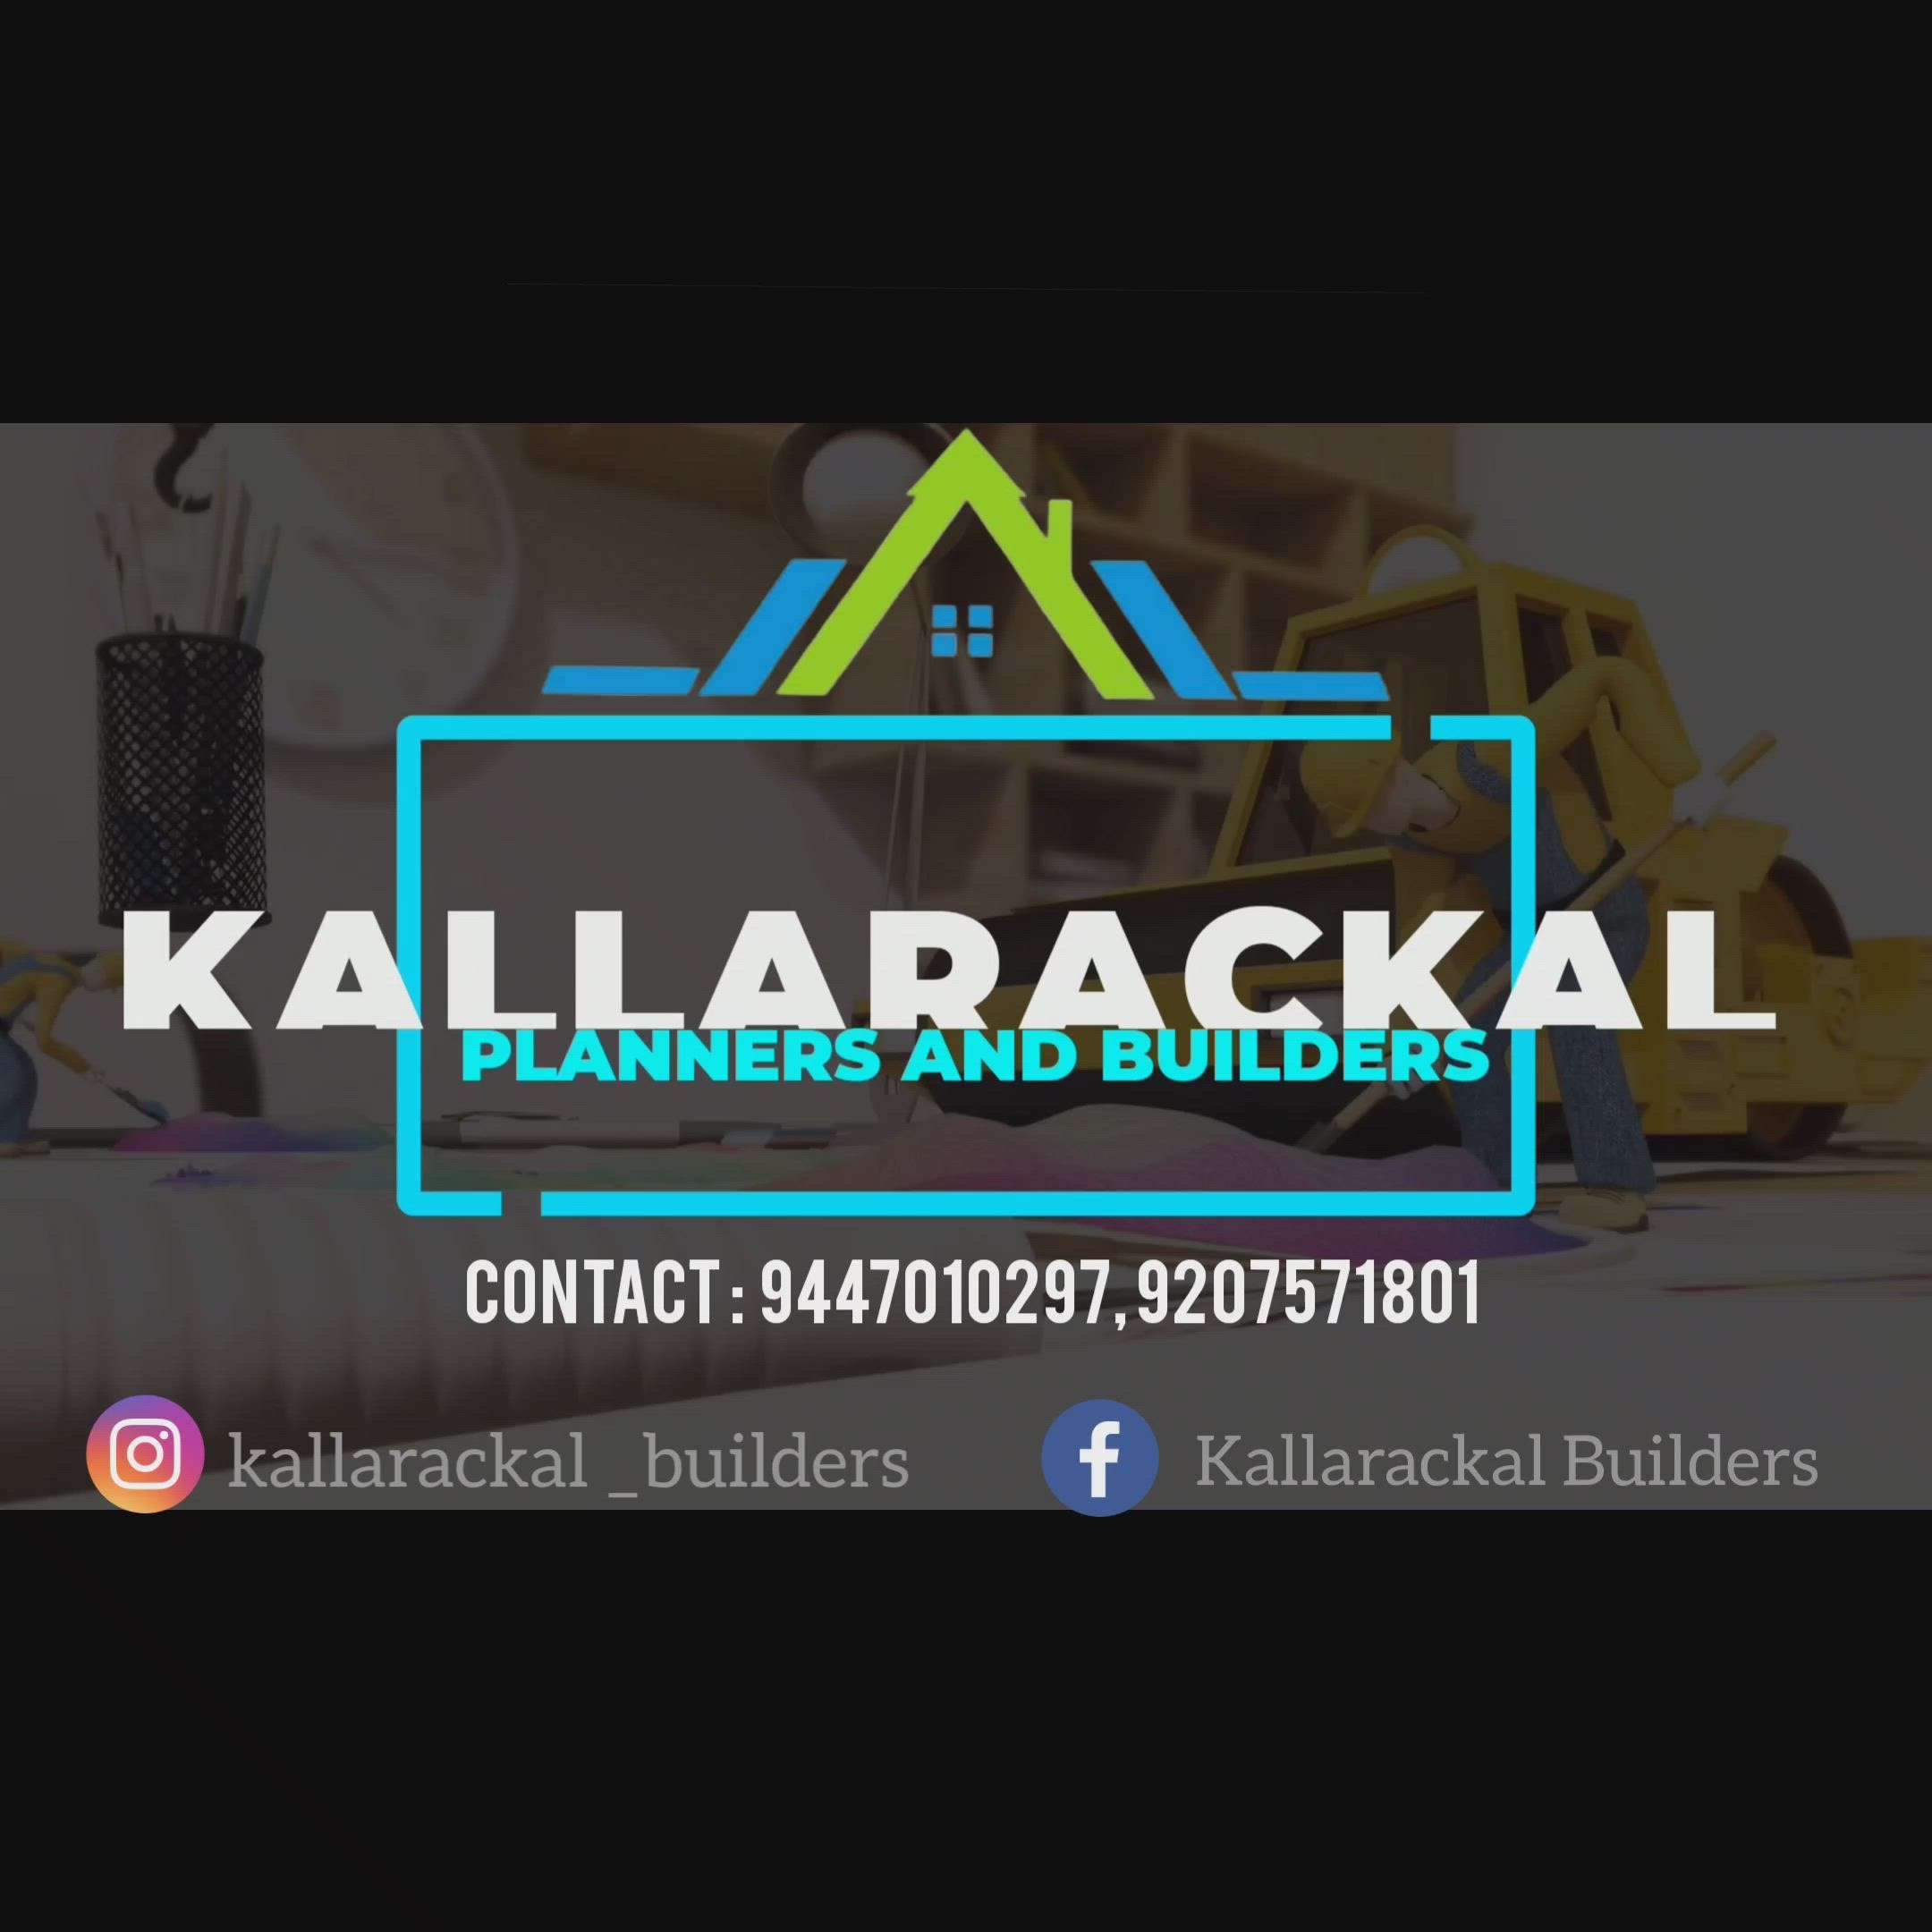 We build your dream home in your own land in your dream concept🏡🏡

For more details Visit : KALLARACKAL PLANNERS AND BUILDERS
SURYA TOWER
OPP: ST. MARY'S CHURCH LALAM, PALA
CONTACT : +91-9447010297, +91-9207571801